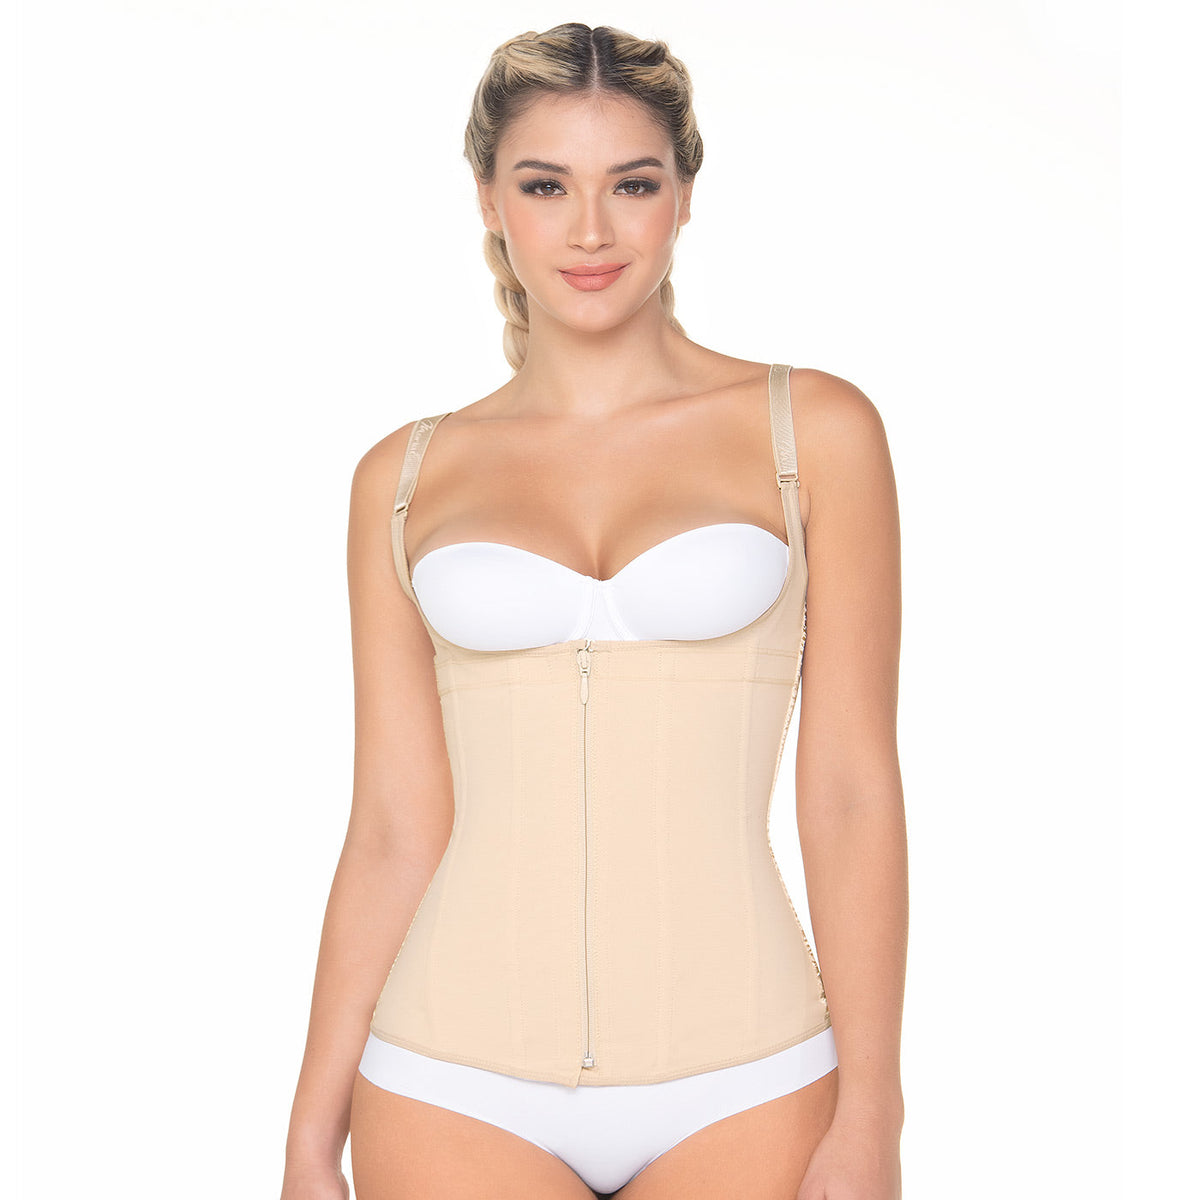 Fajas MariaE FU124 | Slimming Tummy Control Shapewear Vest | Post Surgery and Daily Use